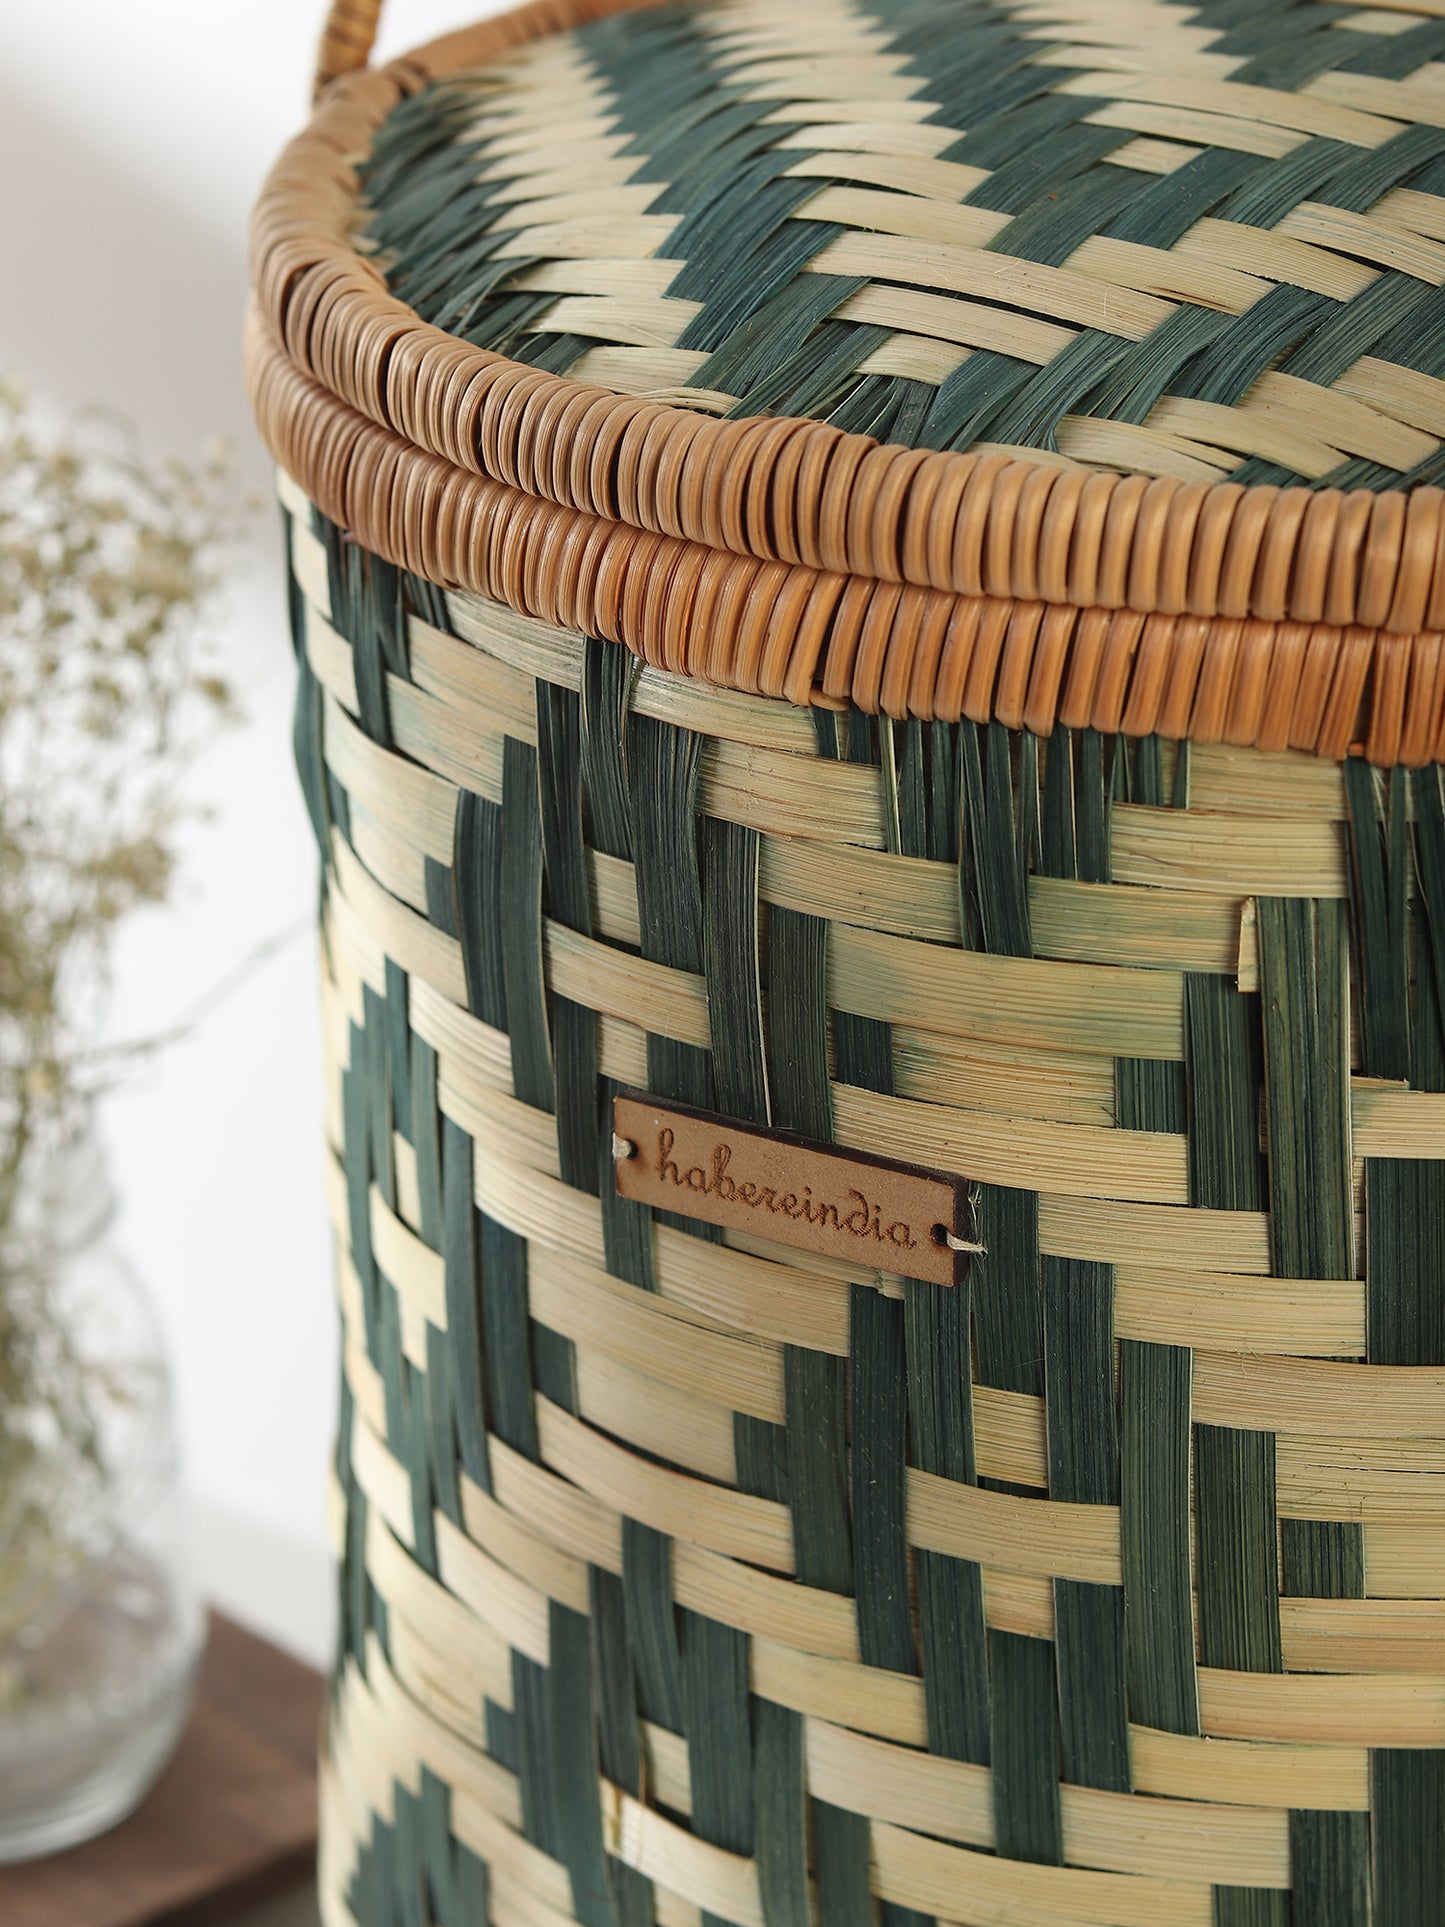 Wicker Laundry Basket With Lid | Bamboo Storage Basket